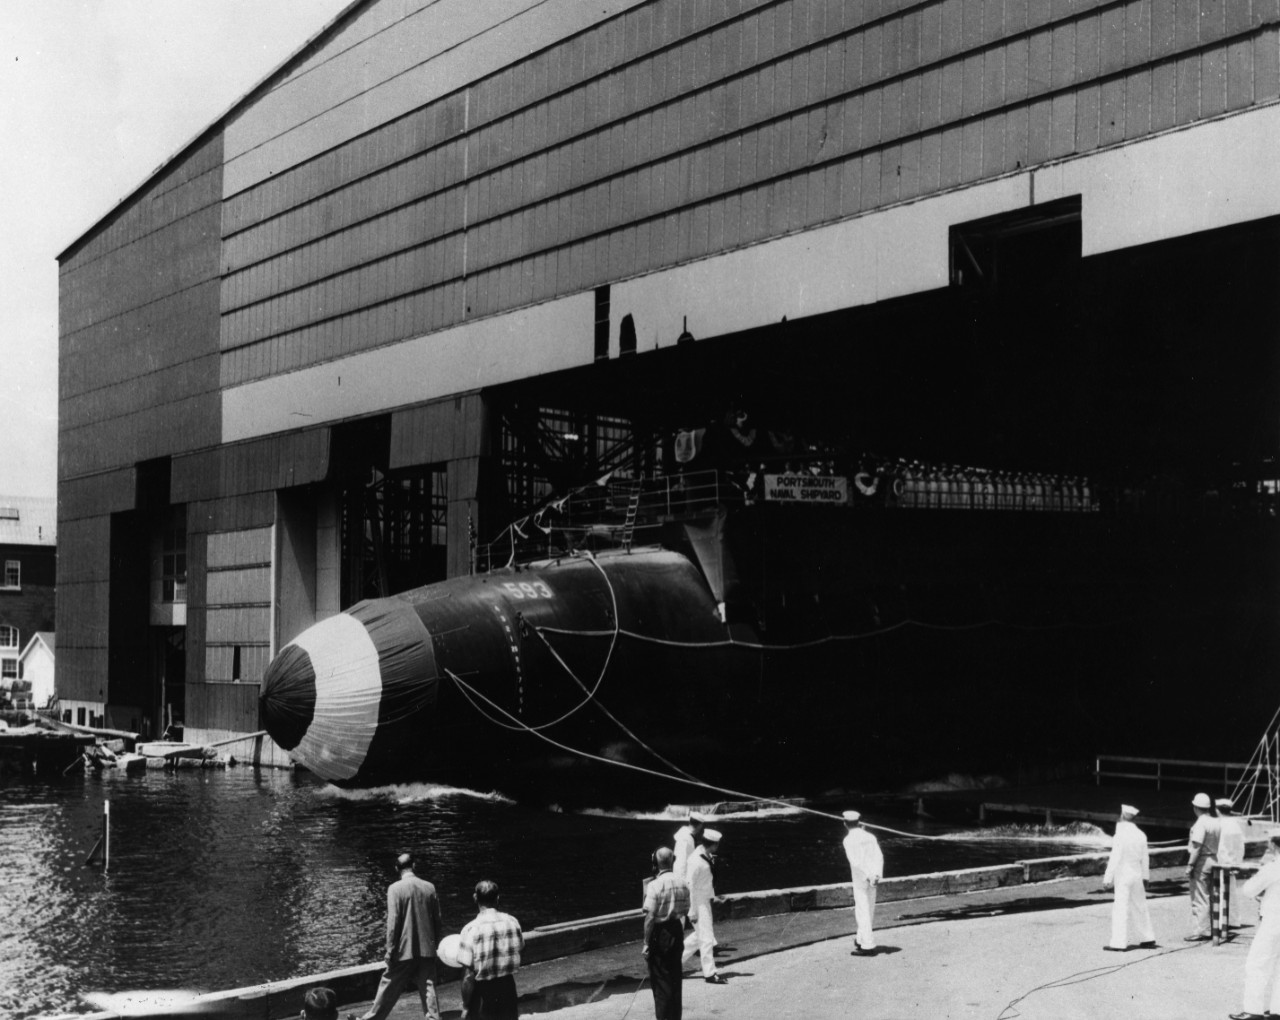 Launch of USS Thresher (SSN-593) at the Portsmouth Naval Shipyard, New Hampshire